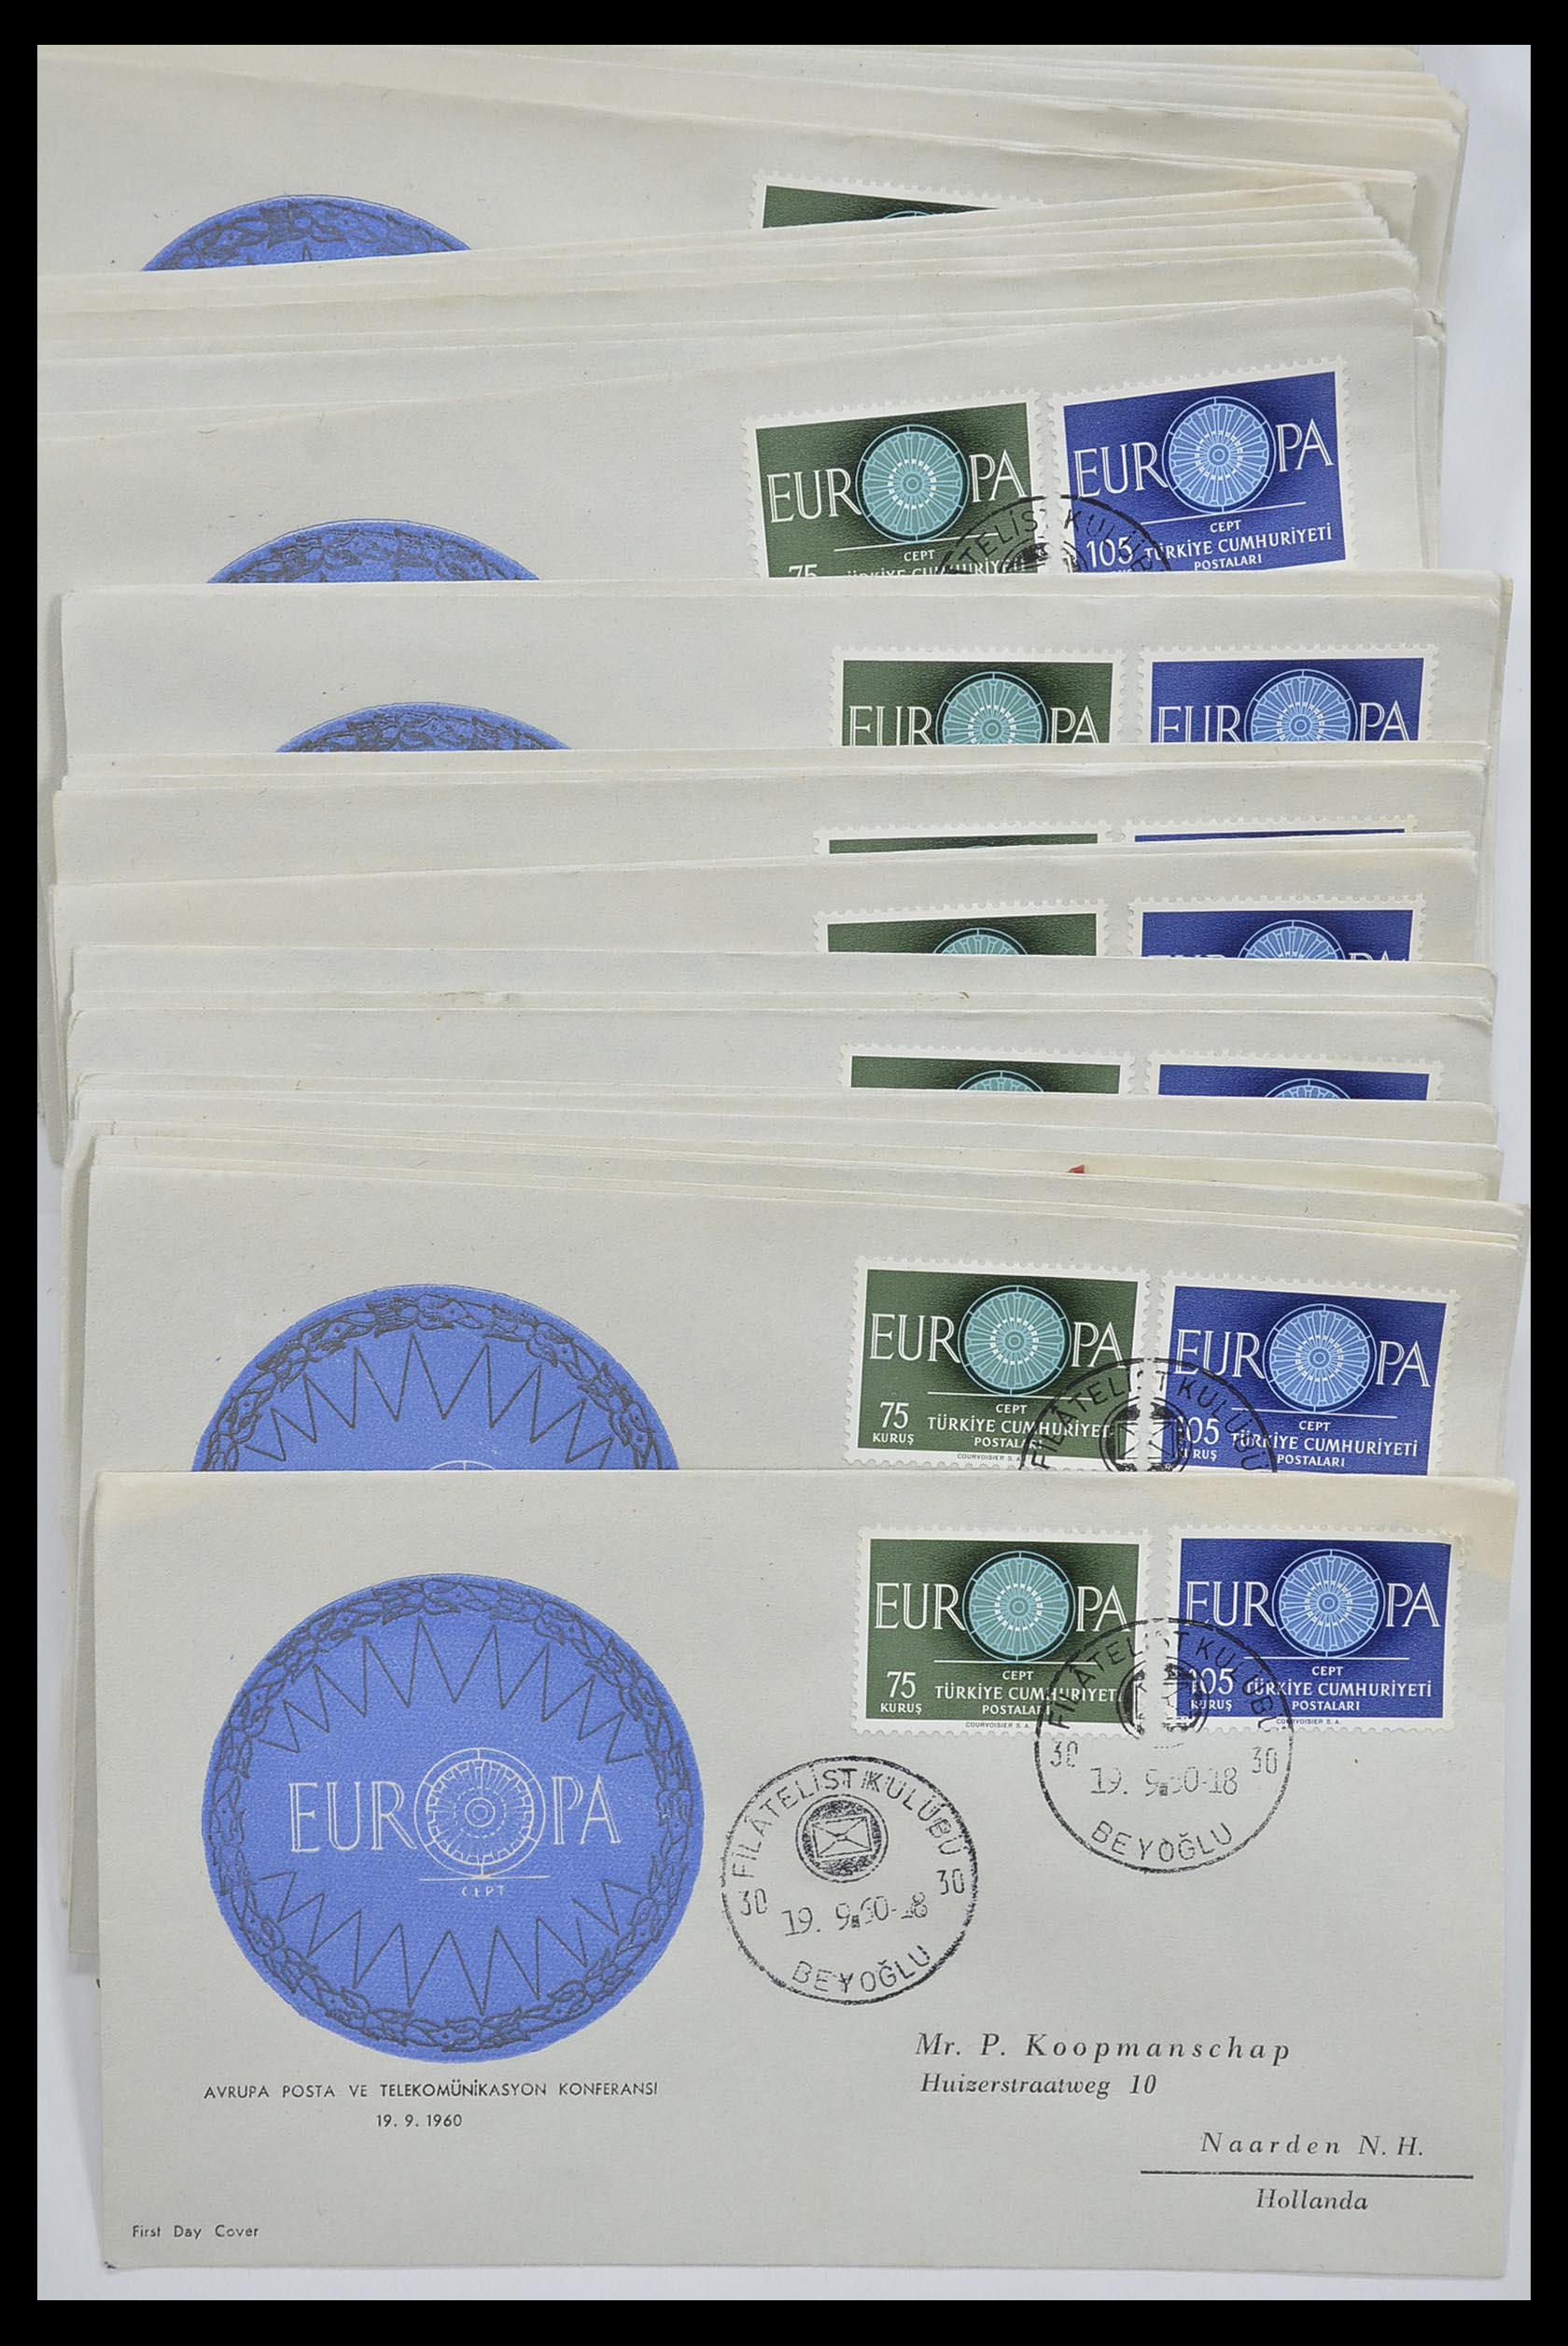 33446 292 - Stamp collection 33446 Europa CEPT 1956-1961 engros.